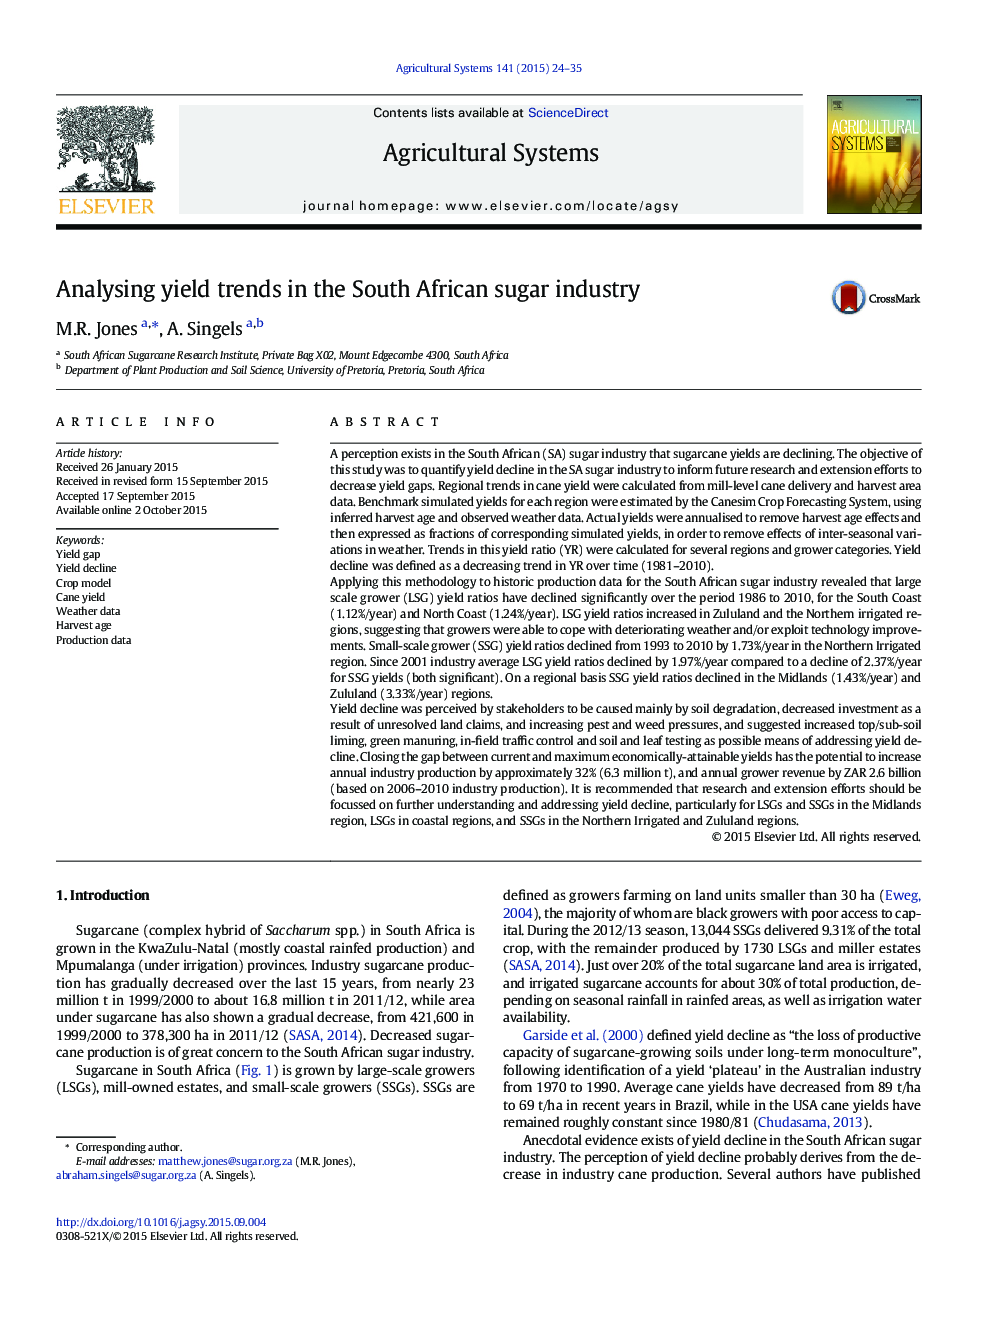 Analysing yield trends in the South African sugar industry